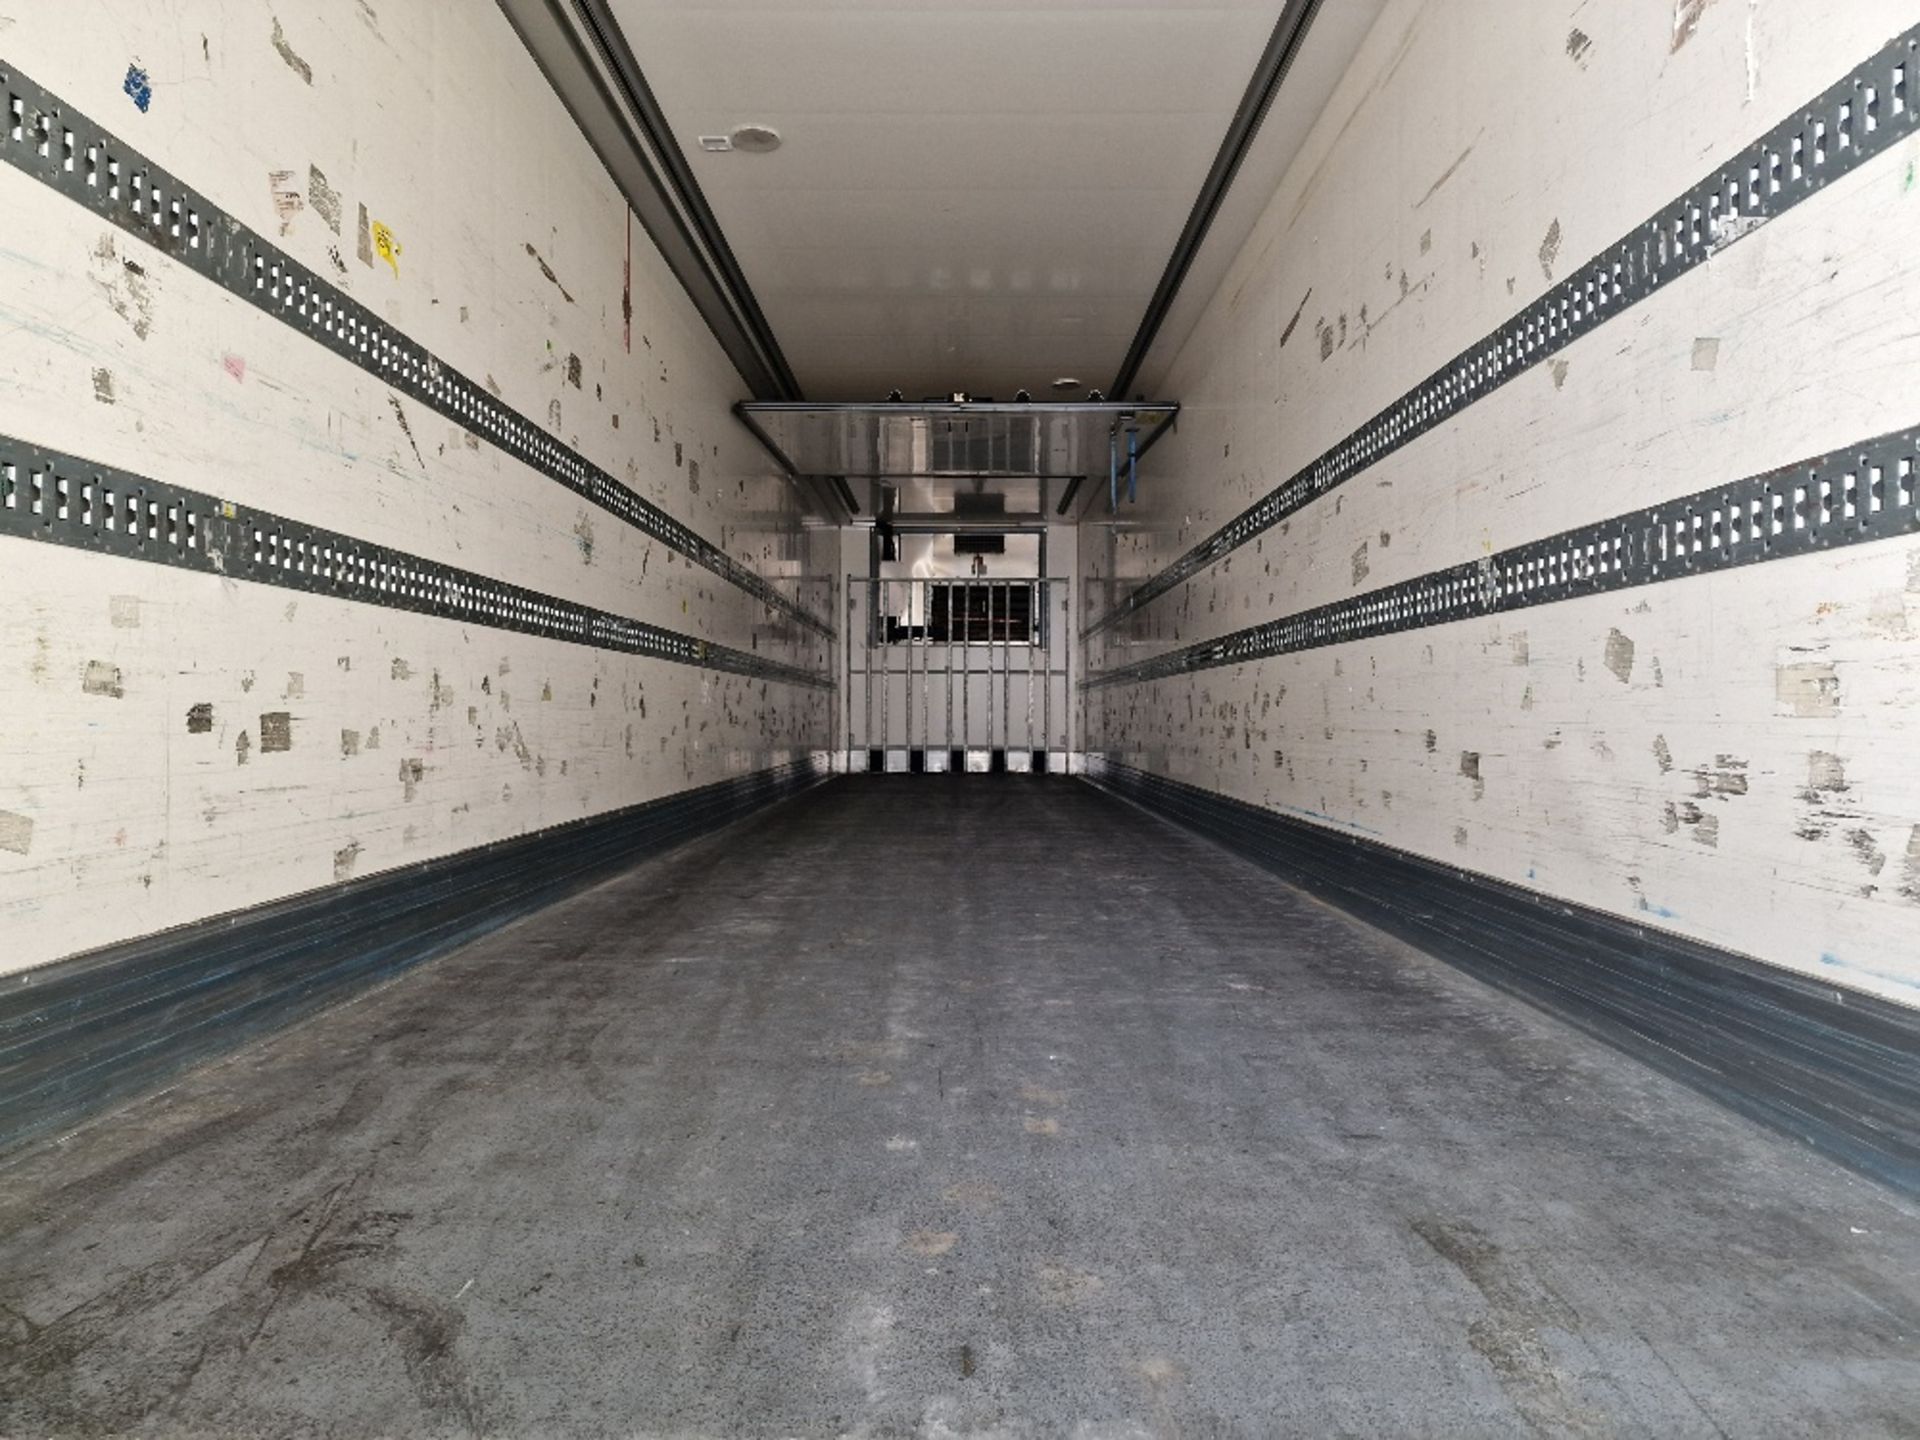 EF051 – 2015 Chereau 13.6m Refrigerated Trailer - Image 7 of 13